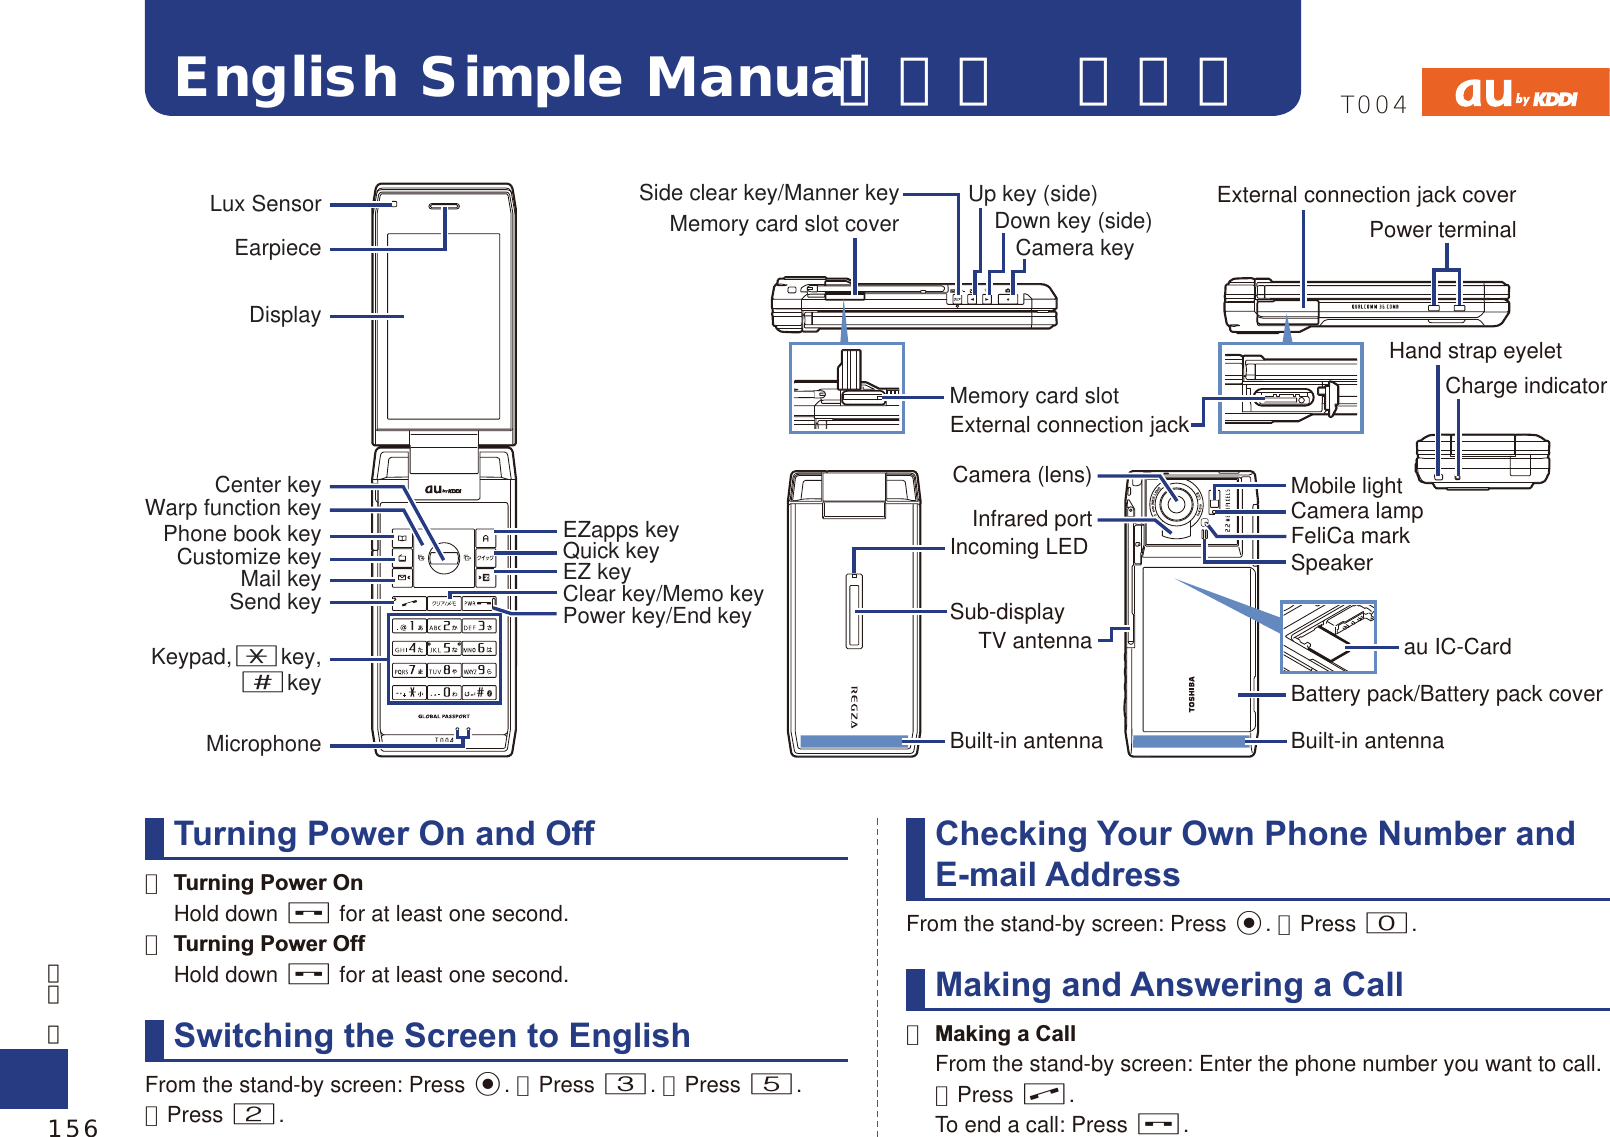 English Simple Manual（簡易英語版）Turning Power On and Off● Turning Power On Hold down F for at least one second.● Turning Power Off Hold down F for at least one second.Switching the Screen to EnglishFrom the stand-by screen: Press c.▶Press 3.▶Press 5.▶Press 2.Checking Your Own Phone Number and E-mail AddressFrom the stand-by screen: Press c.▶Press 0.Making and Answering a Call● Making a Call  From the stand-by screen: Enter the phone number you want to call. ▶Press N.  To end a call: Press F.Lux SensorEarpieceDisplayCenter keyWarp function keyPhone book keyCustomize keyMail keySend keyKeypad,*key,#keyMicrophoneEZapps keyQuick keyEZ keyClear key/Memo keyPower key/End keyMemory card slot coverSide clear key/Manner key Up key (side) Down key (side) Camera keyMemory card slotExternal connection jack coverPower terminalExternal connection jackCamera (lens)Infrared portTV antennaIncoming LEDSub-displayBuilt-in antennaMobile lightCamera lampFeliCa markSpeakerBattery pack/Battery pack coverBuilt-in antennaHand strap eyeletCharge indicatorau IC-CardT004156